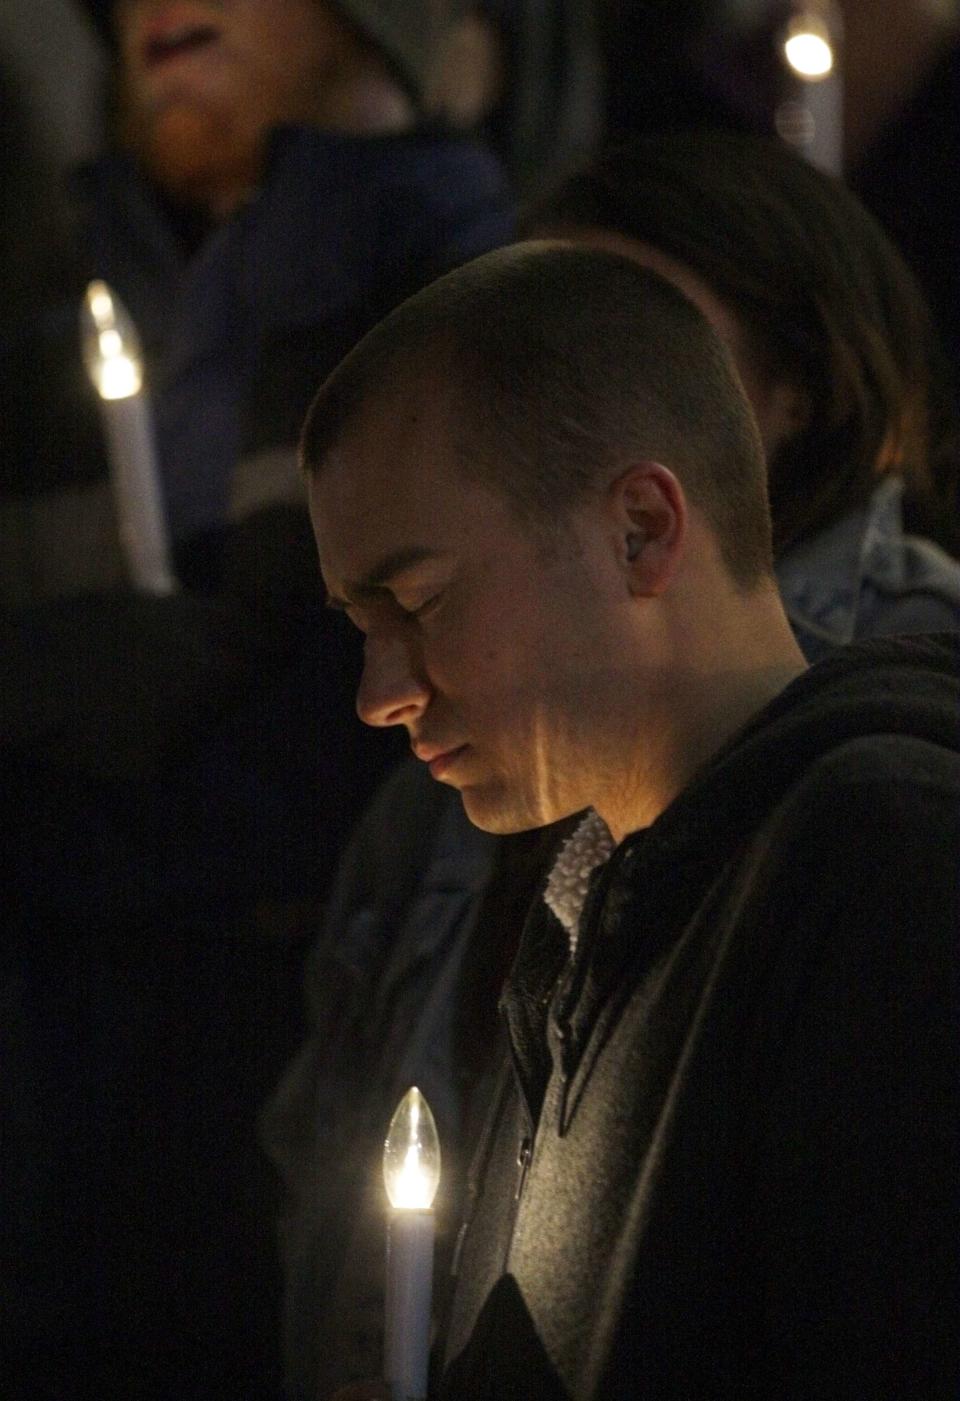 Adam Dirnberger prays while attending a candlelight vigil for death row inmate Joseph Franklin on the steps of St. Francis Xavier Church in St. Louis